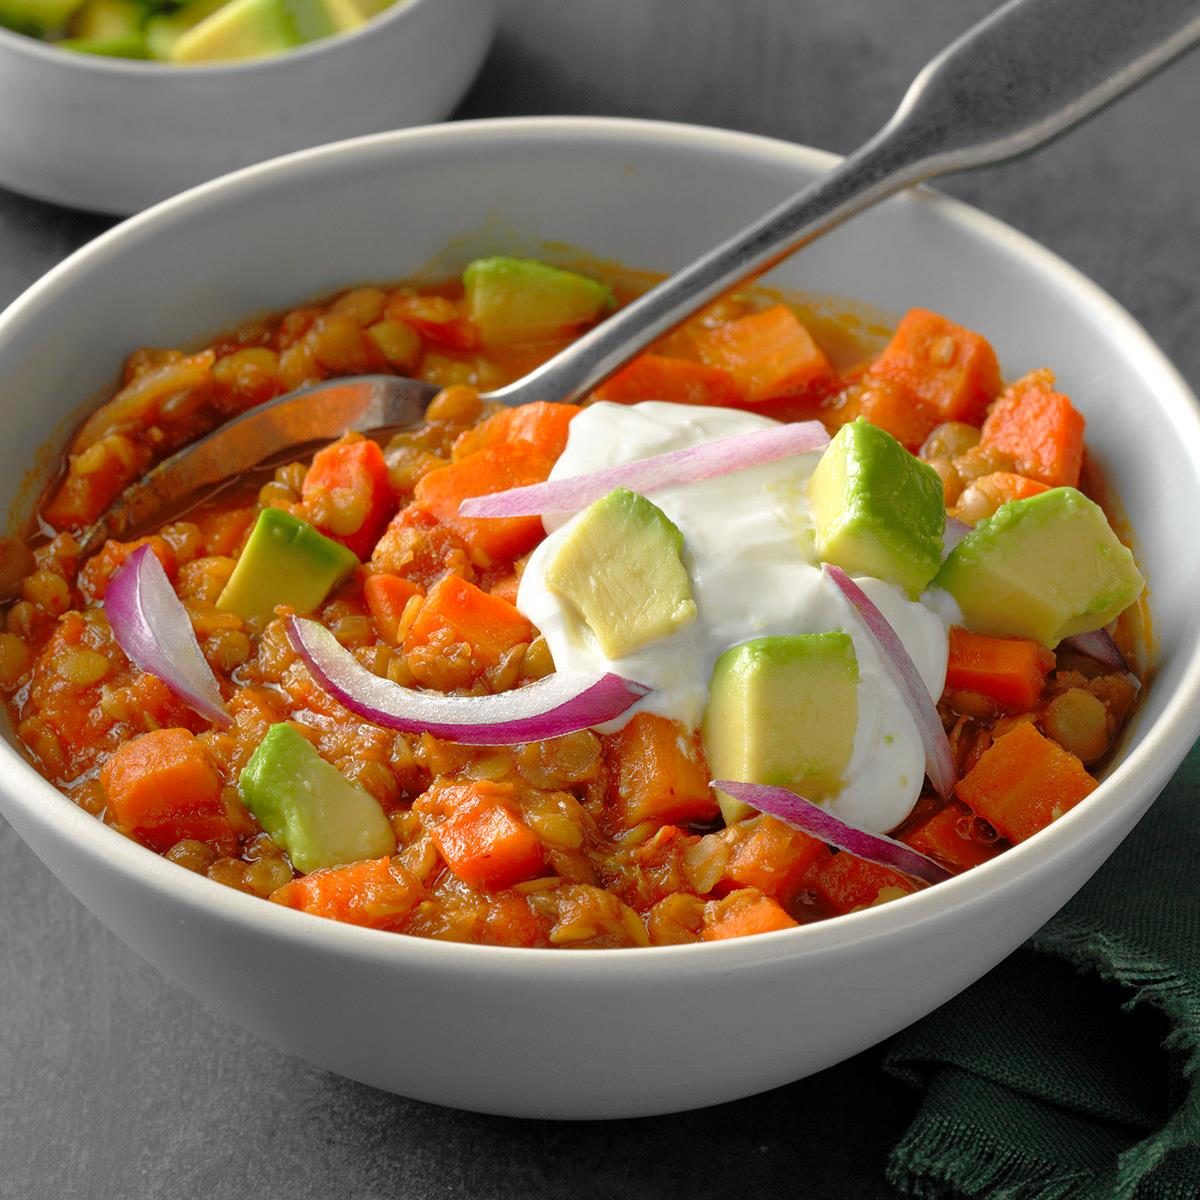 Carrot And Lentil Chili  Exps Thedscodr20 241396 B01 10 2b 2